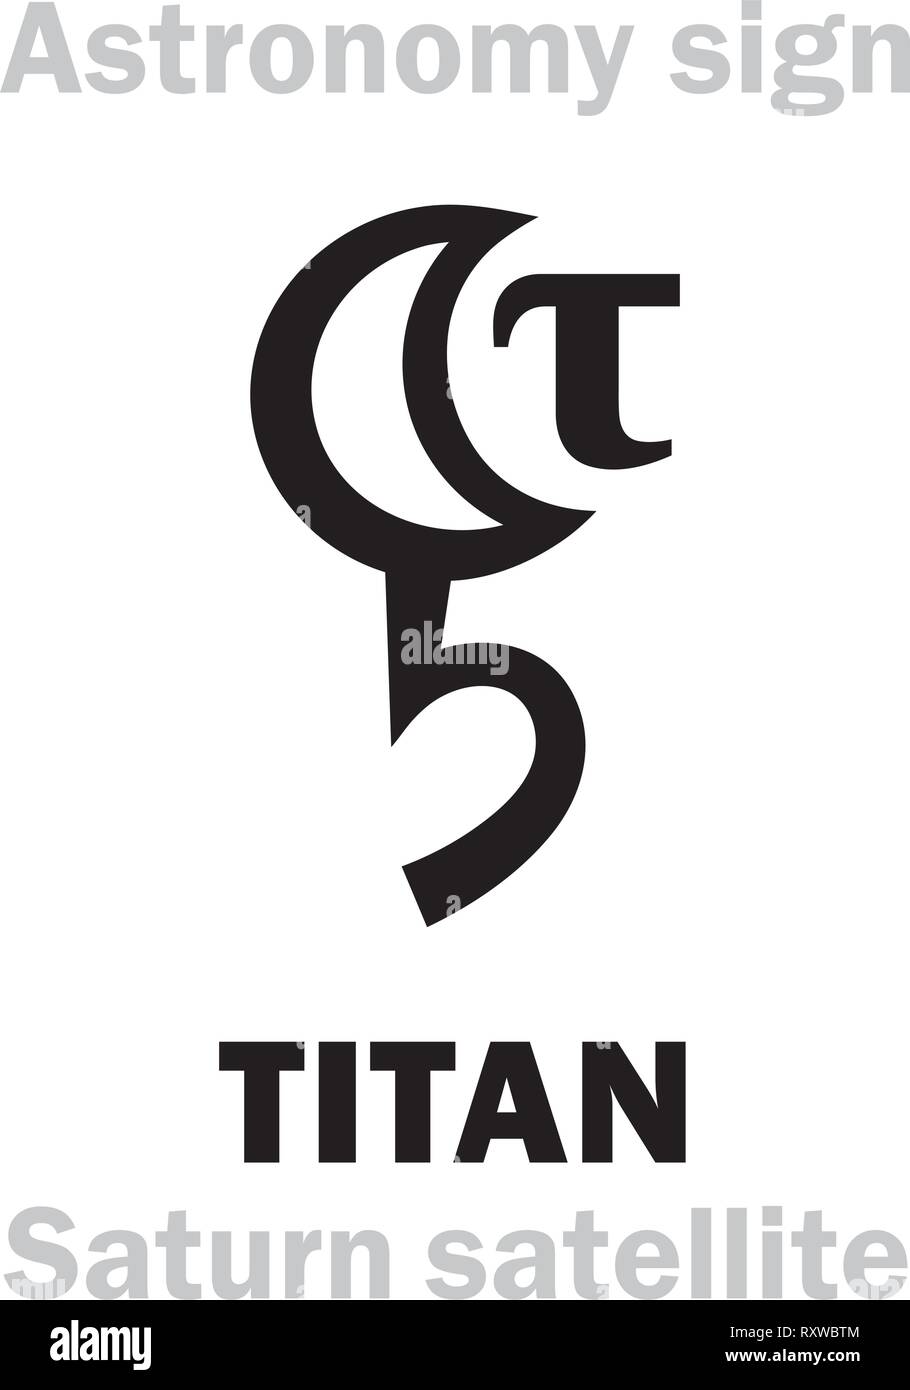 Astrology Alphabet: TITAN (Saturnian satellite II), one of the moons of Saturn (Largest planetary satellite in the Solar system). Hieroglyphic symbol. Stock Vector